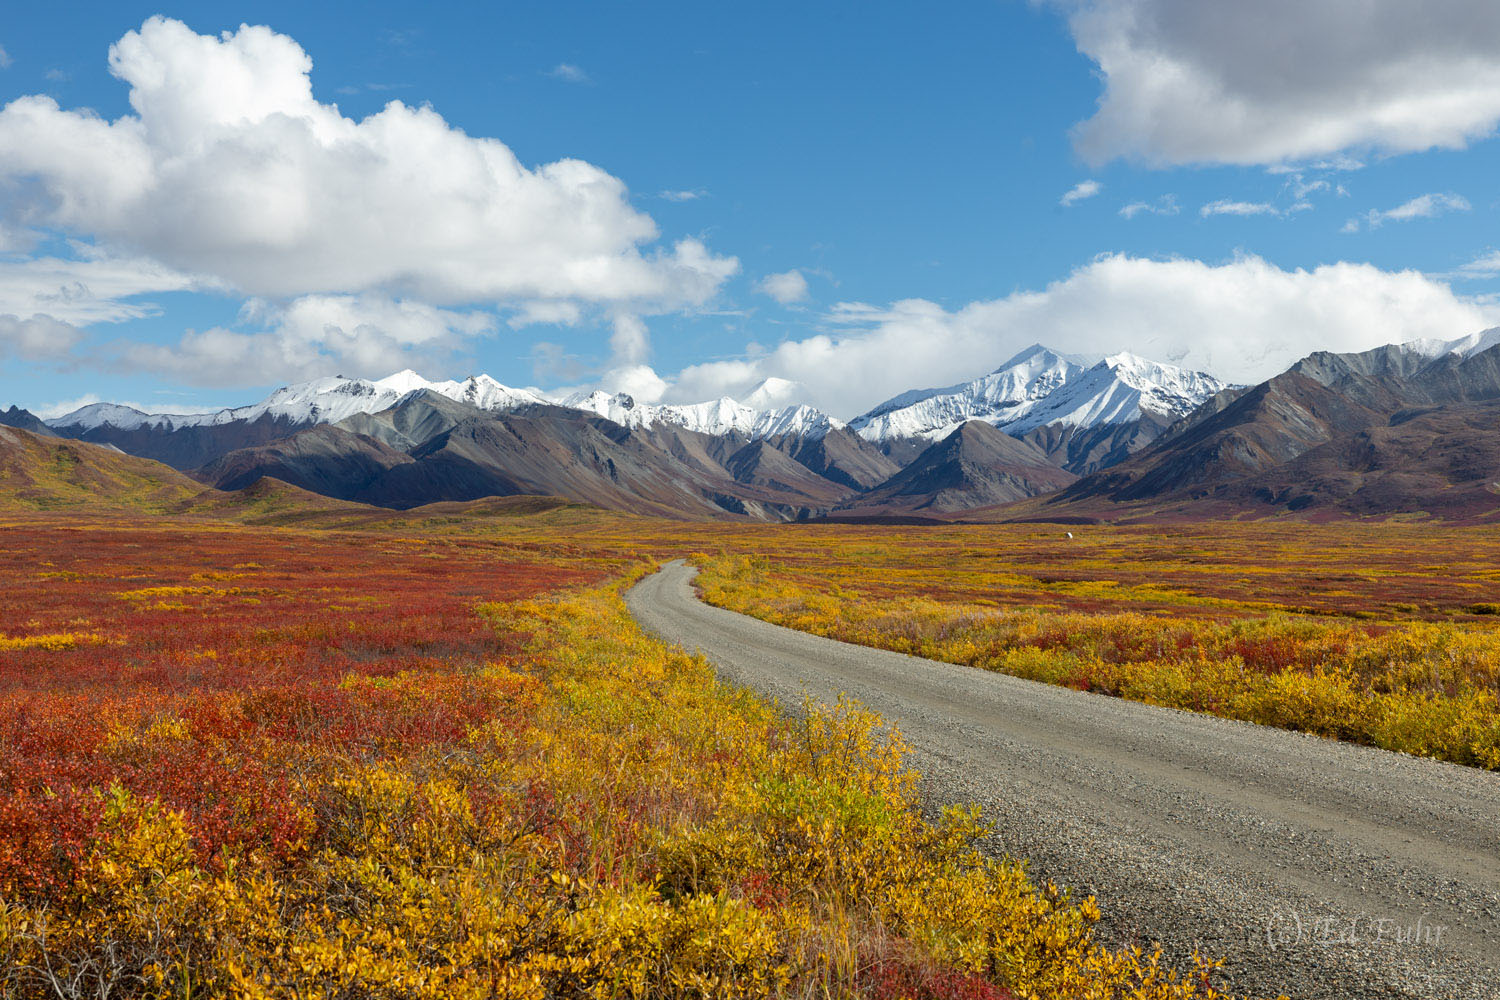 Denali Park Road passes though miles of berry bushes and grasses before beginning its ascent to the more rugged ridges and gorges...